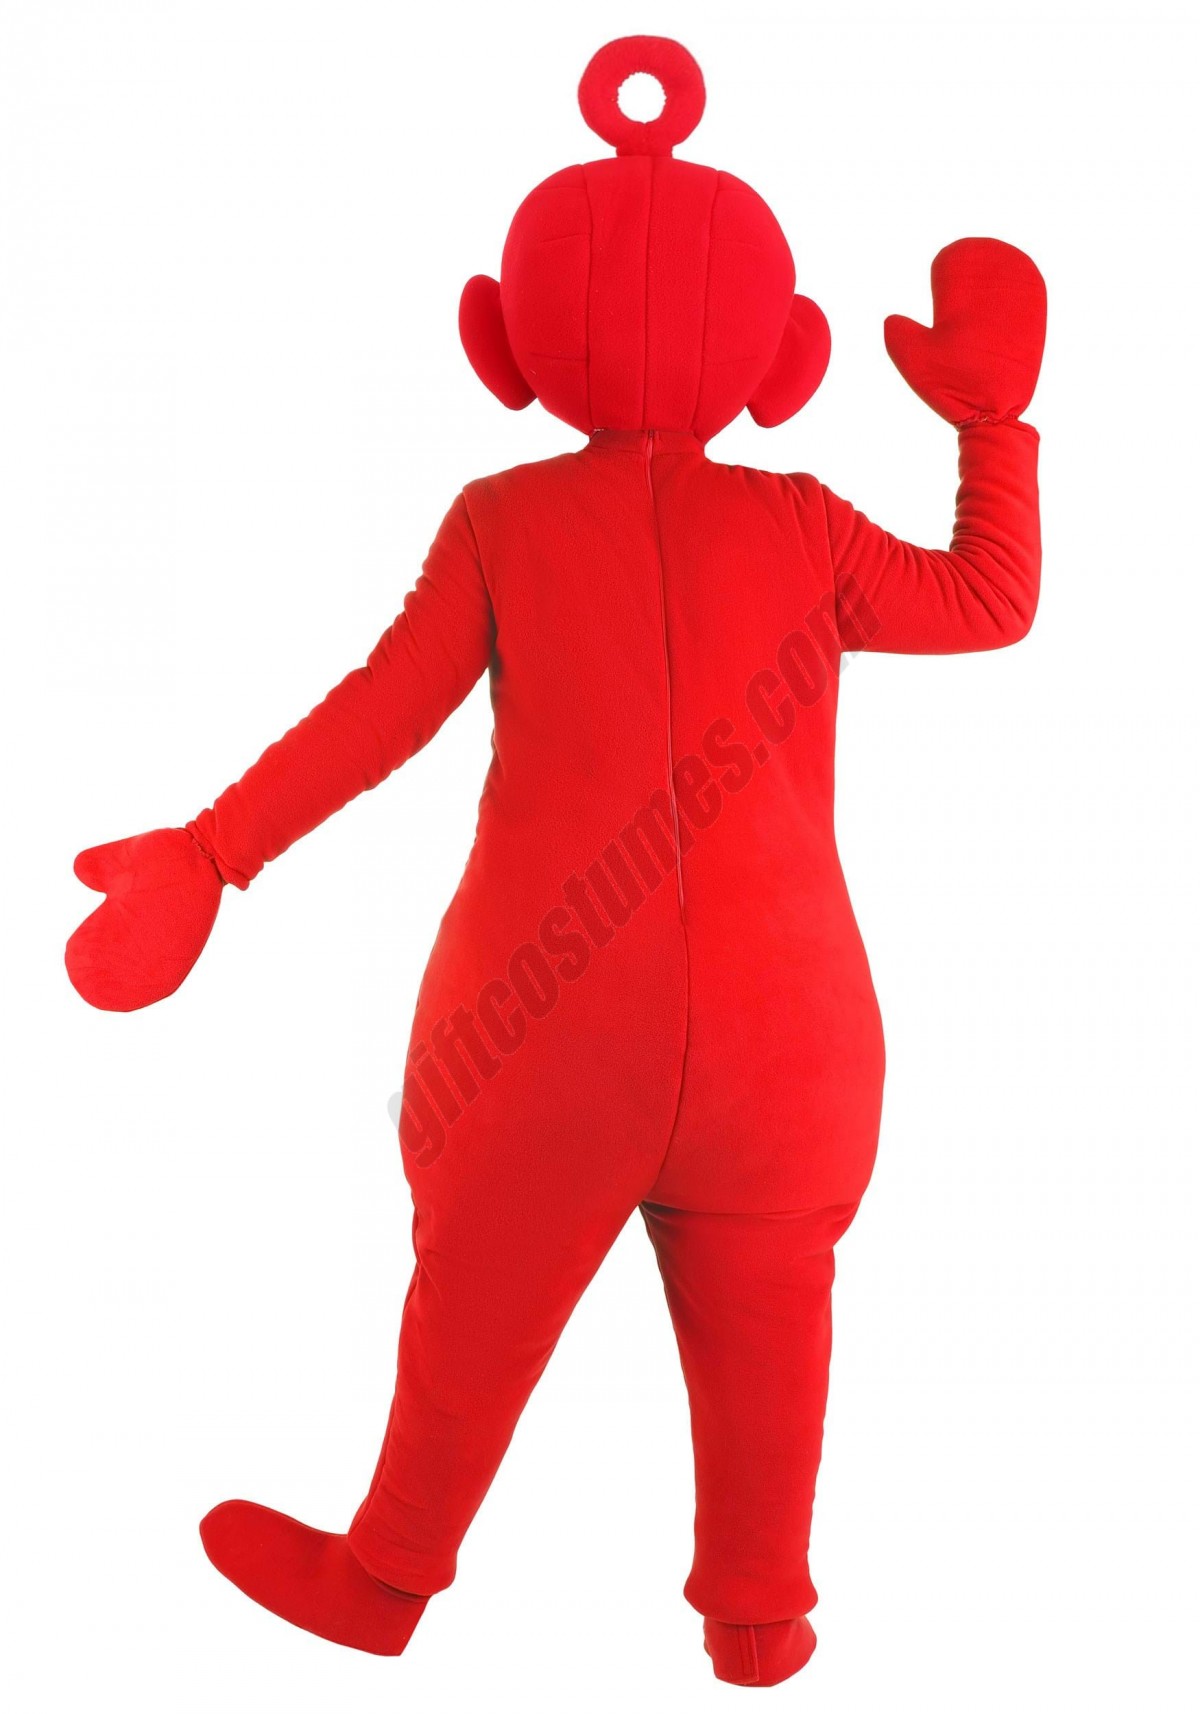 Po Teletubbies Costume for Adults Promotions - -1